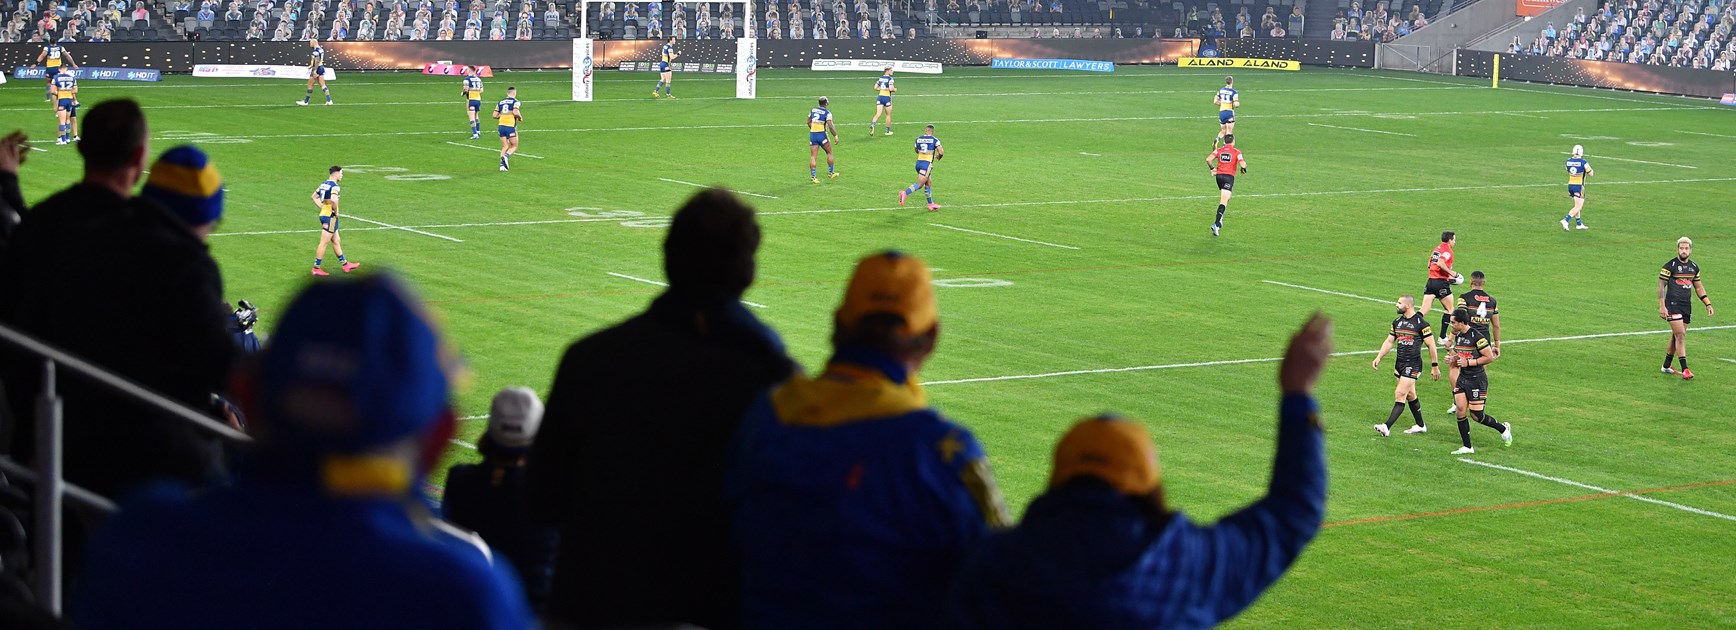 Crowds at Bankwest Stadium: Roosters v Eels, Round 6